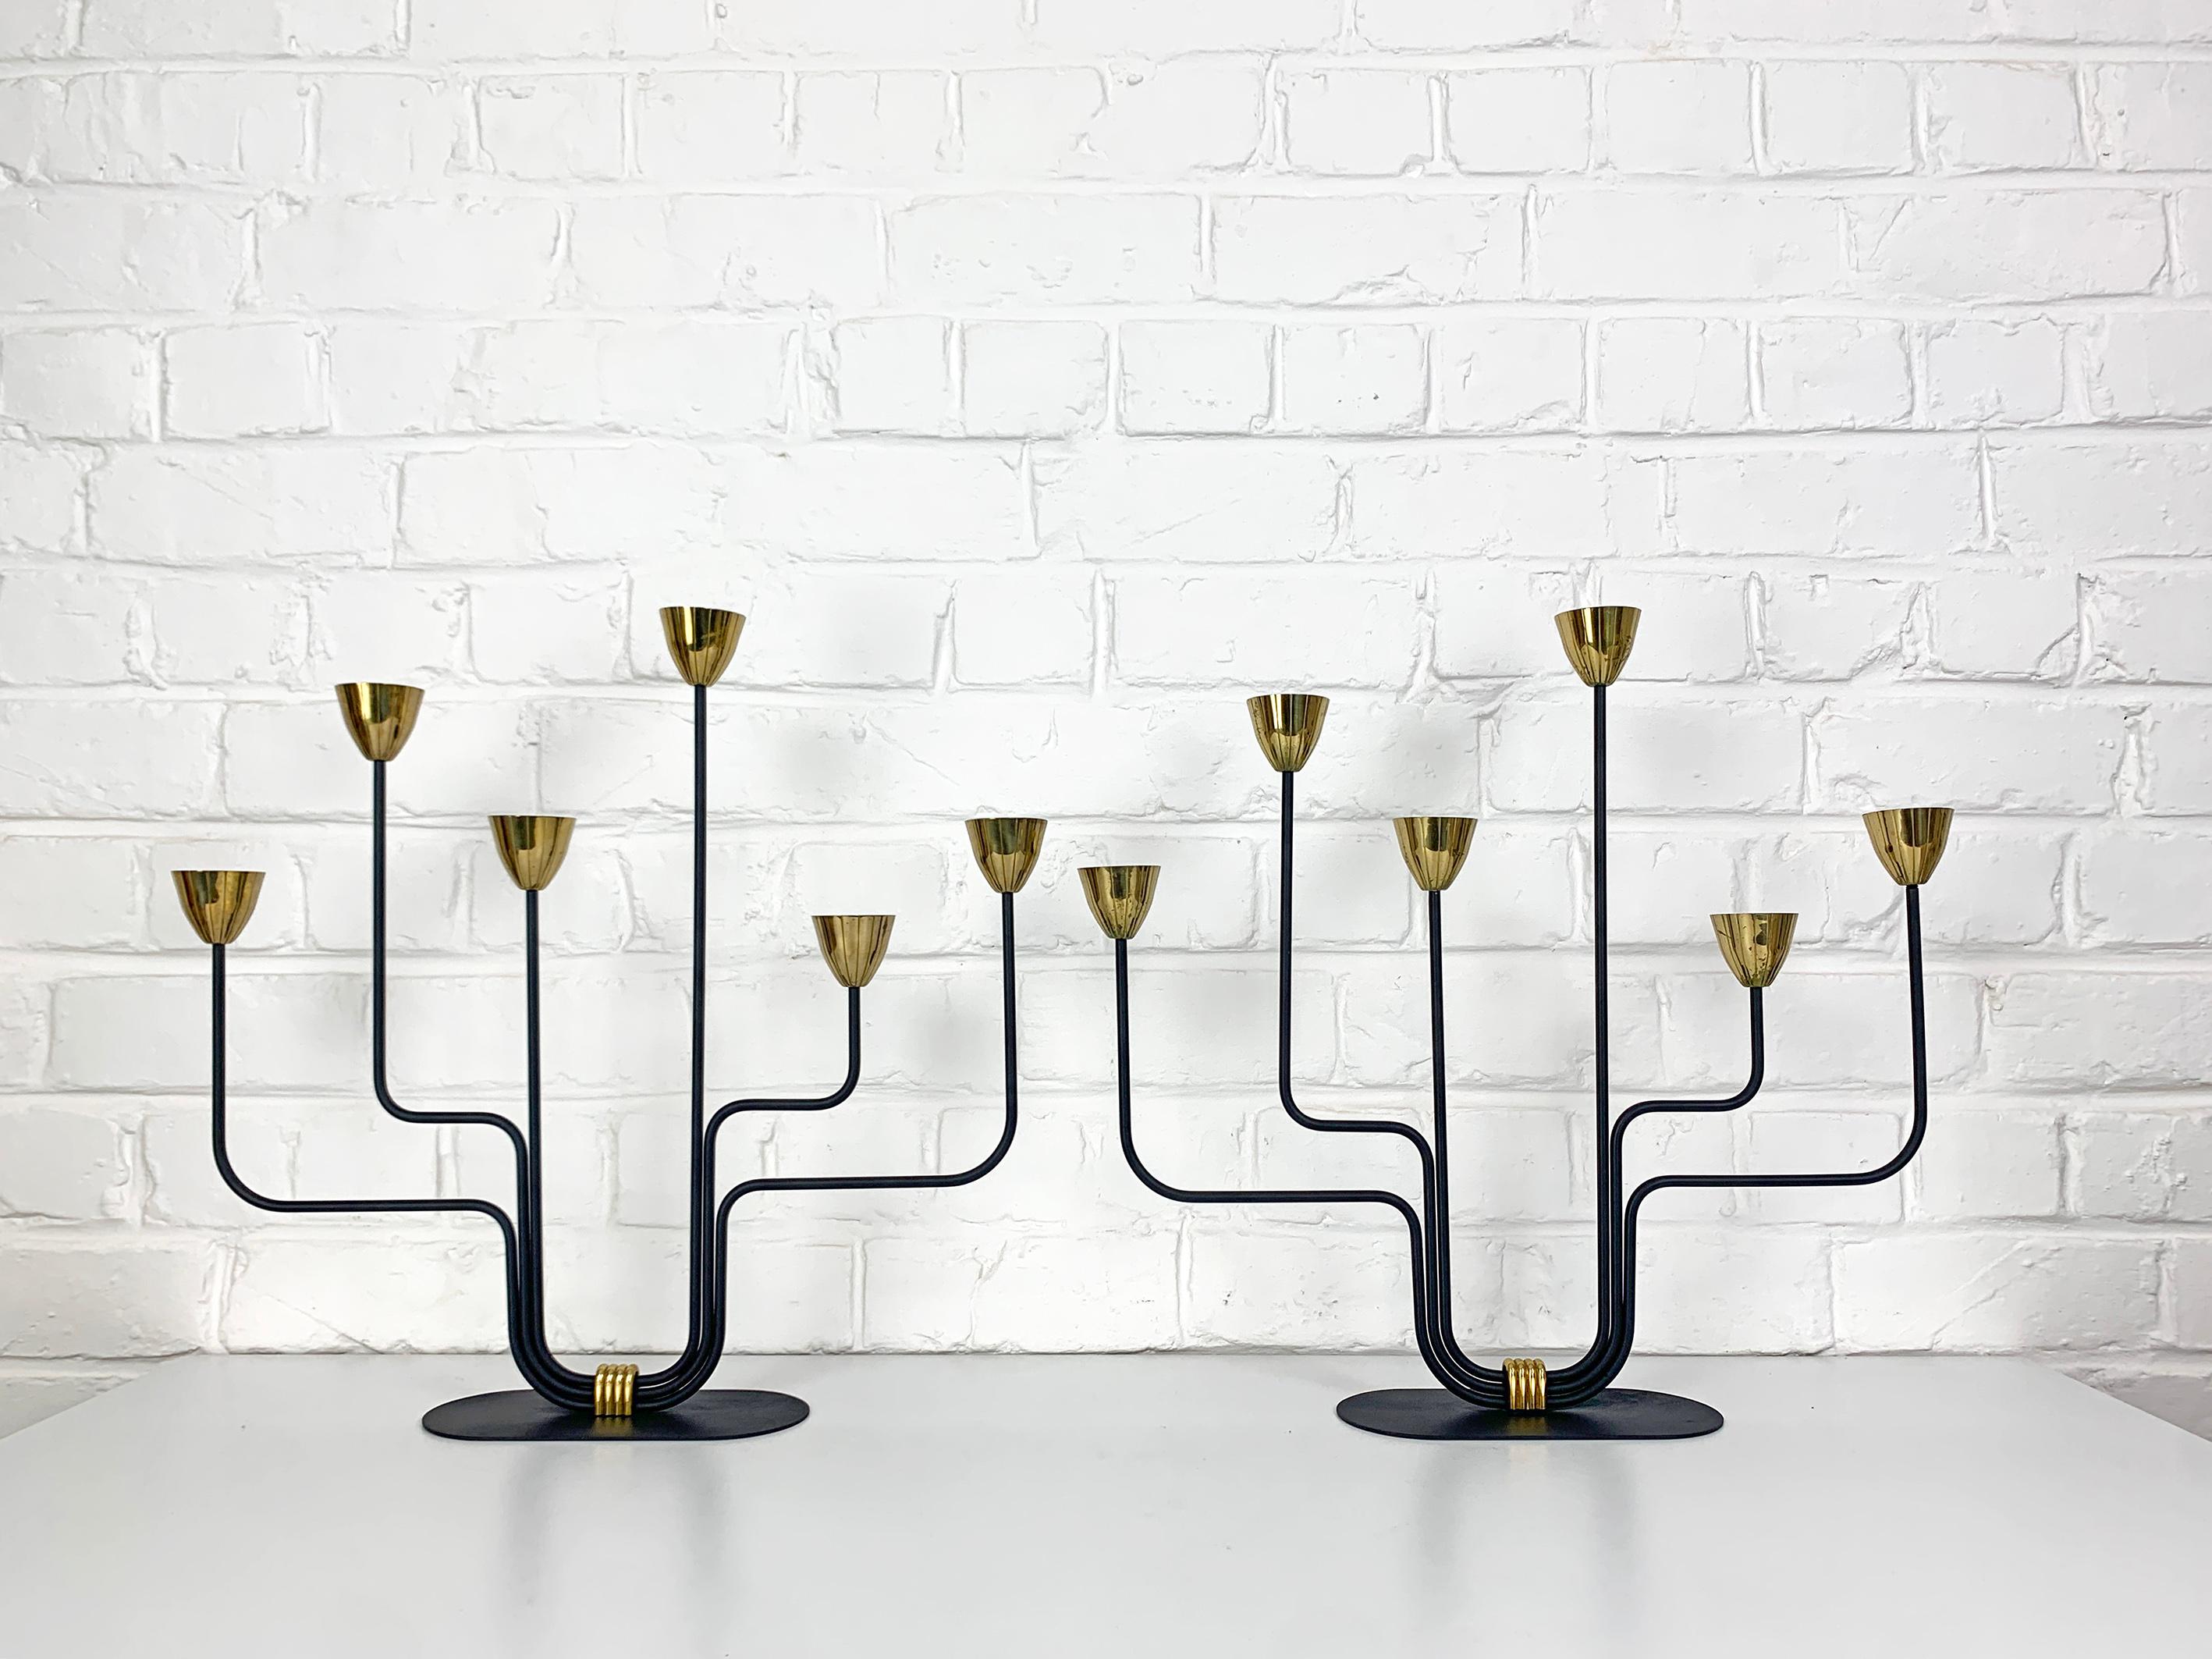 Pair Swedish Modernist candle holders by Gunnar Ander. Produced by Ystad-Metall, located in the town of Ystad in Sweden. 

Stylised flowers in brass on 6 asymmetrical steel arms painted black. This is the big model which is a lot more impressive